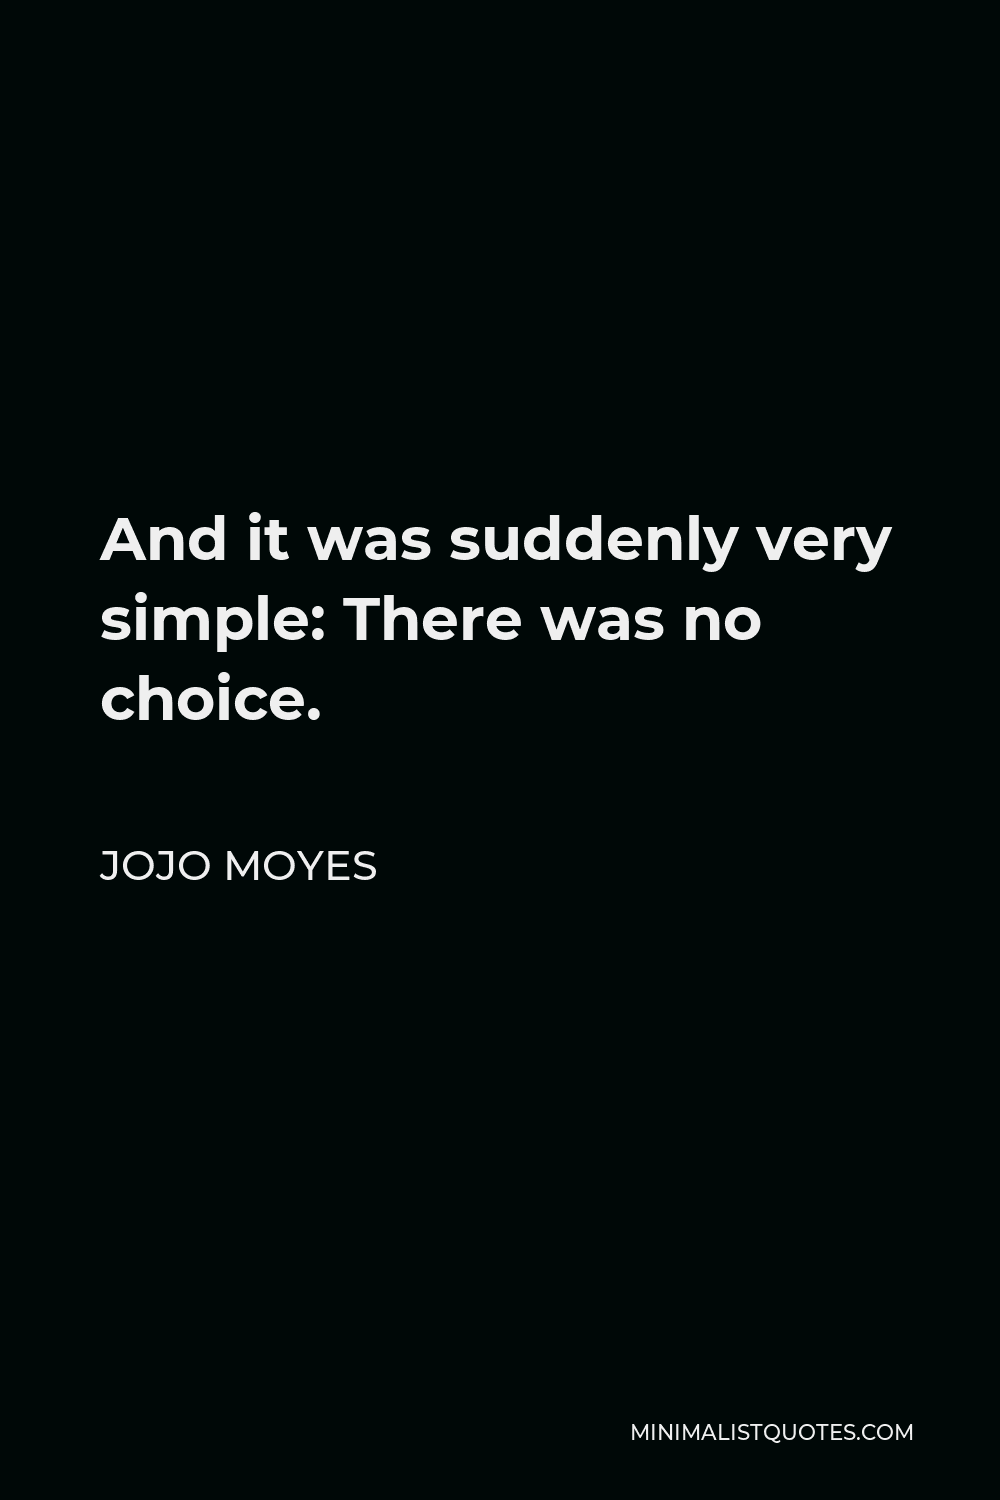 Jojo Moyes Quote - And it was suddenly very simple: There was no choice.